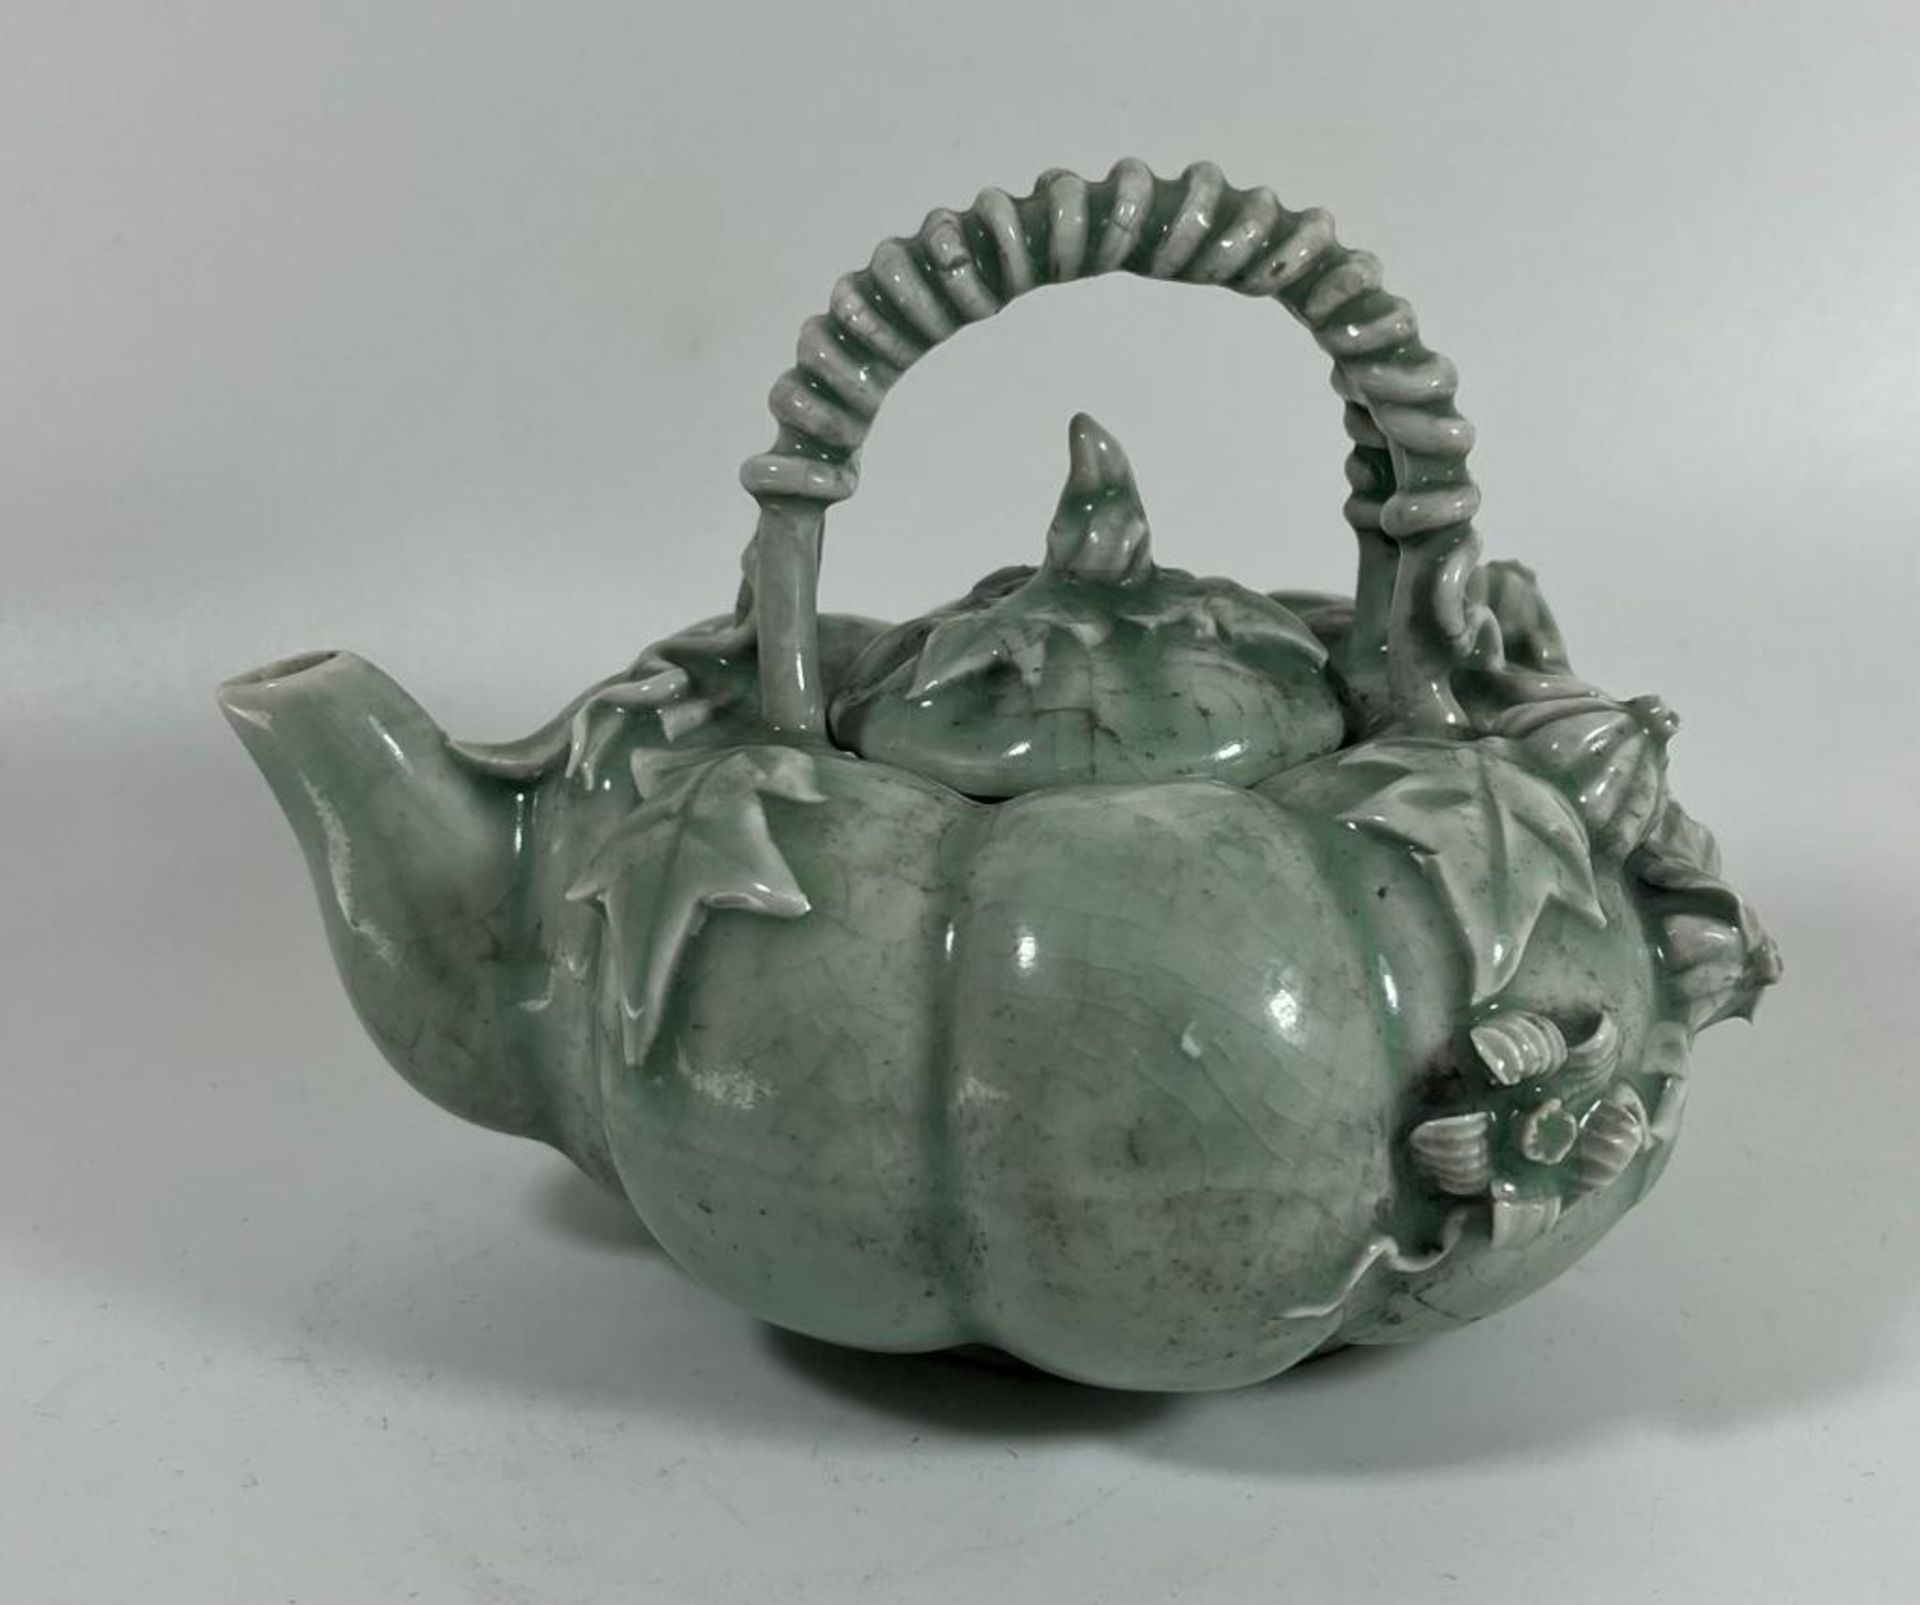 A CHINESE CELADON GLAZE TEAPOT WITH BRAIDED DESIGN HANDLE, HEIGHT 11 CM - Image 2 of 6